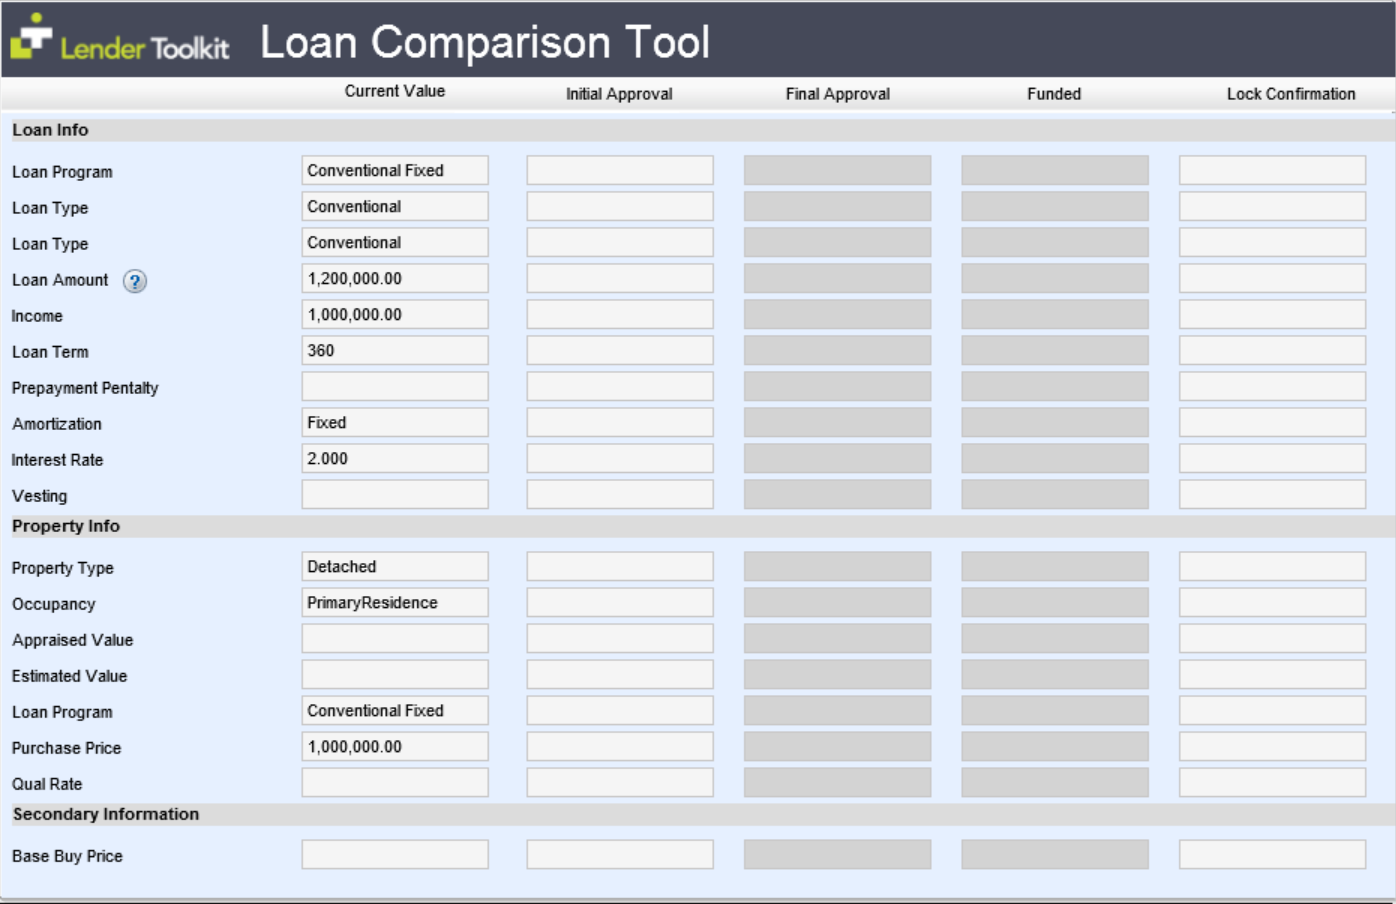 Find Errors with the Loan Comparison Tool by Lender Toolkit